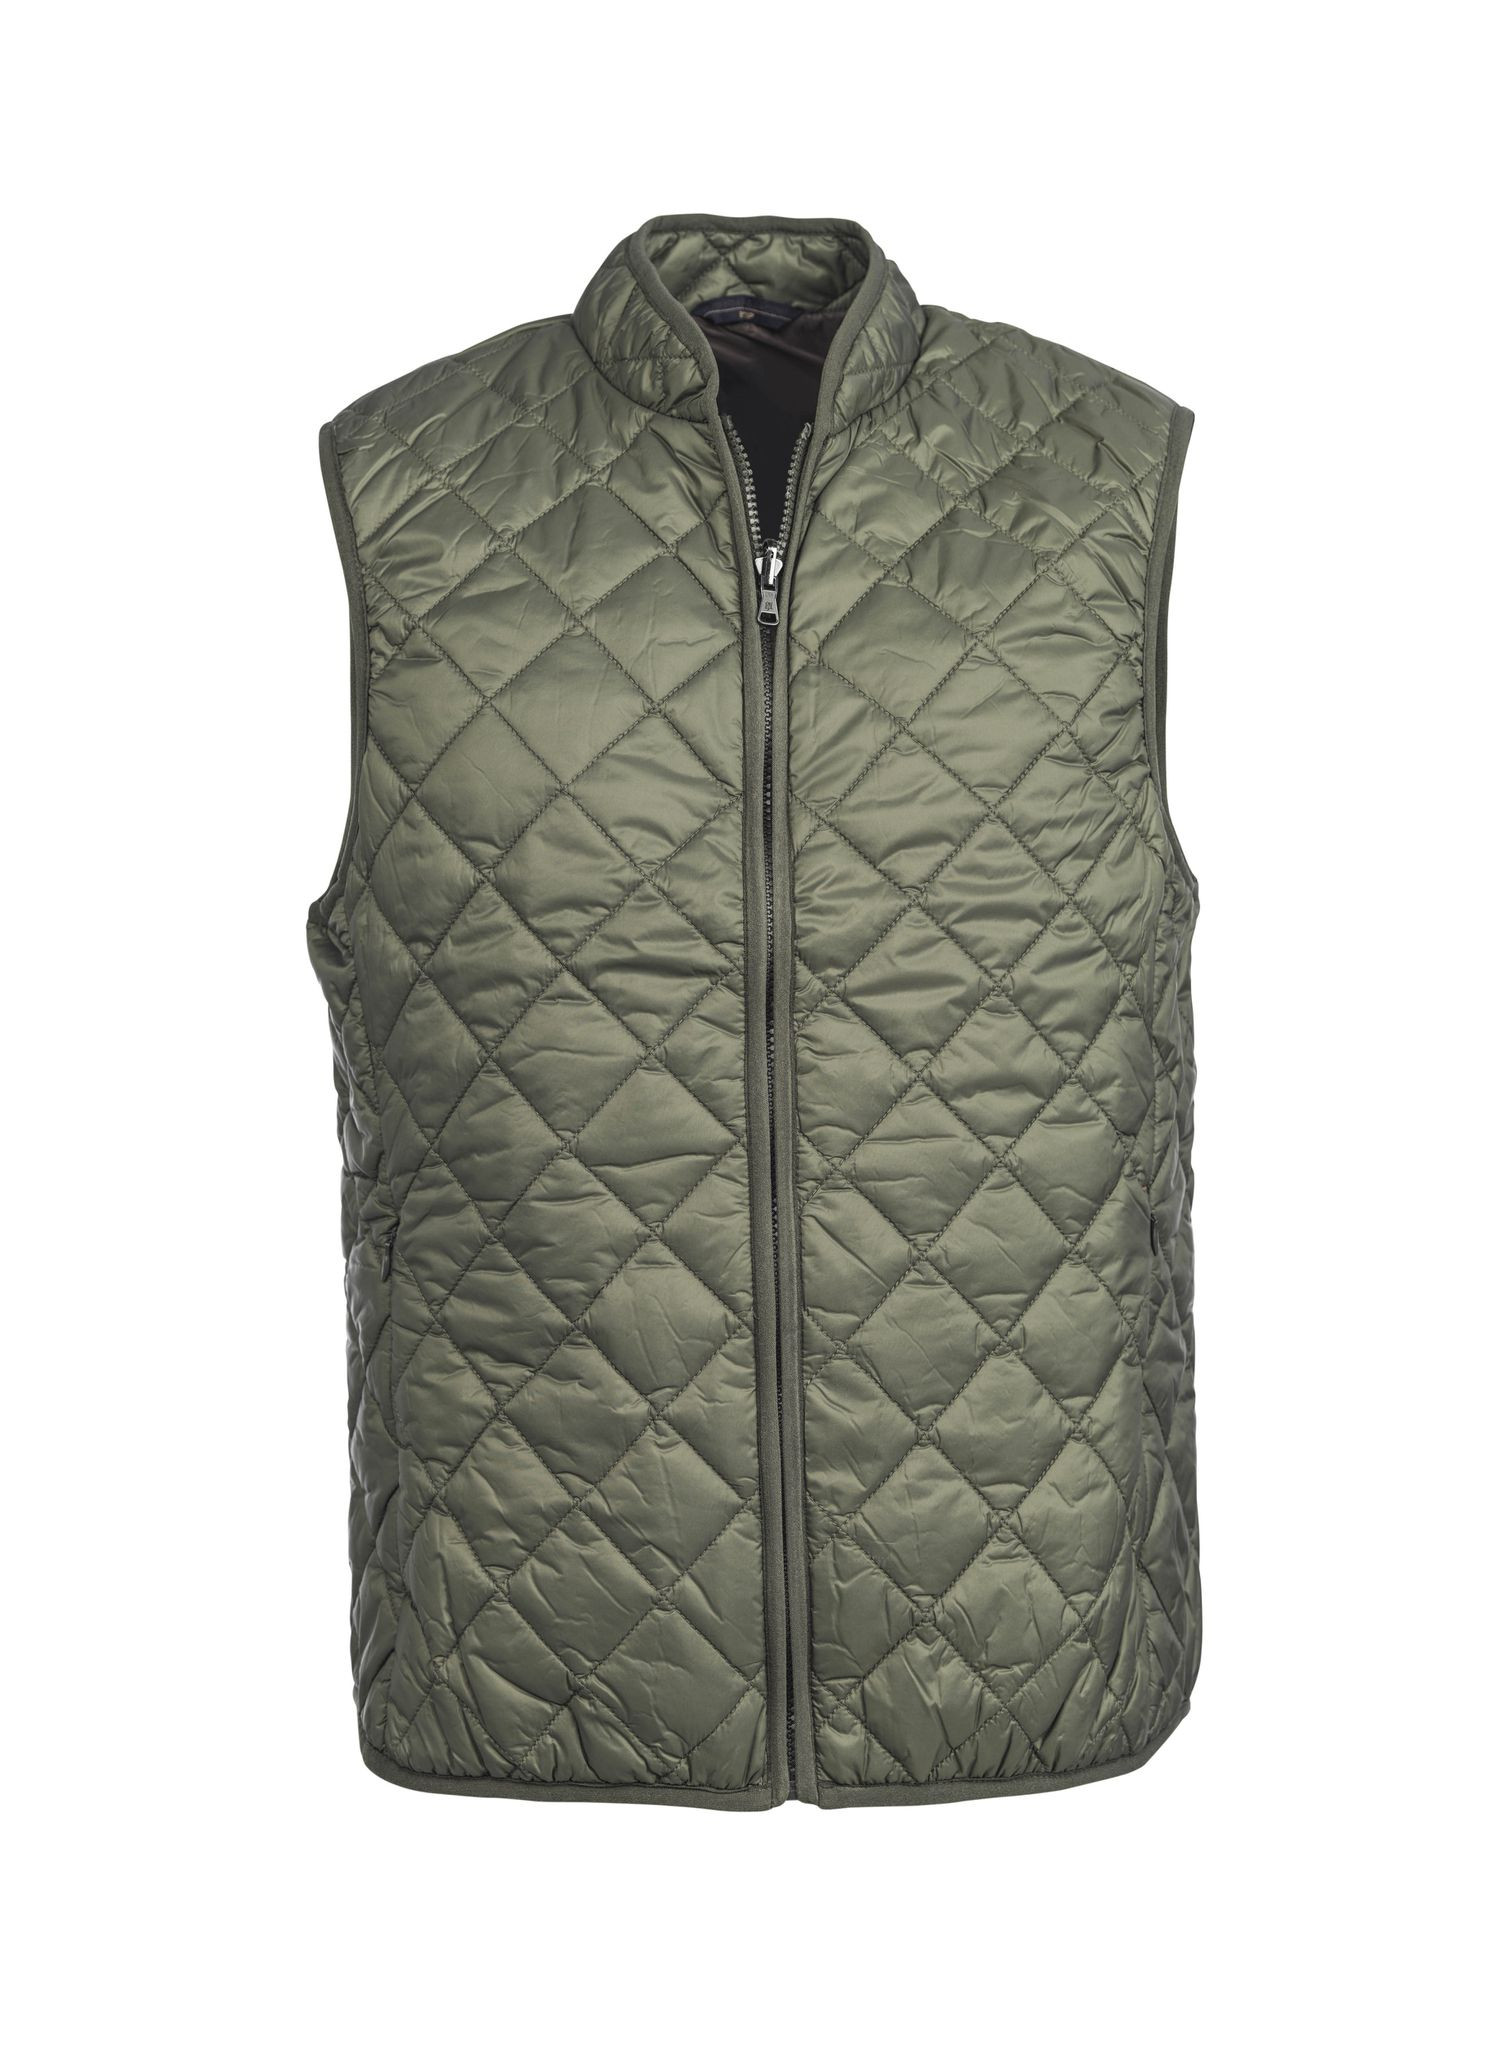 hansen-and-jacob_outerwear_04903_inzip-quilted-light-down-waistcoat_58_green_front_large